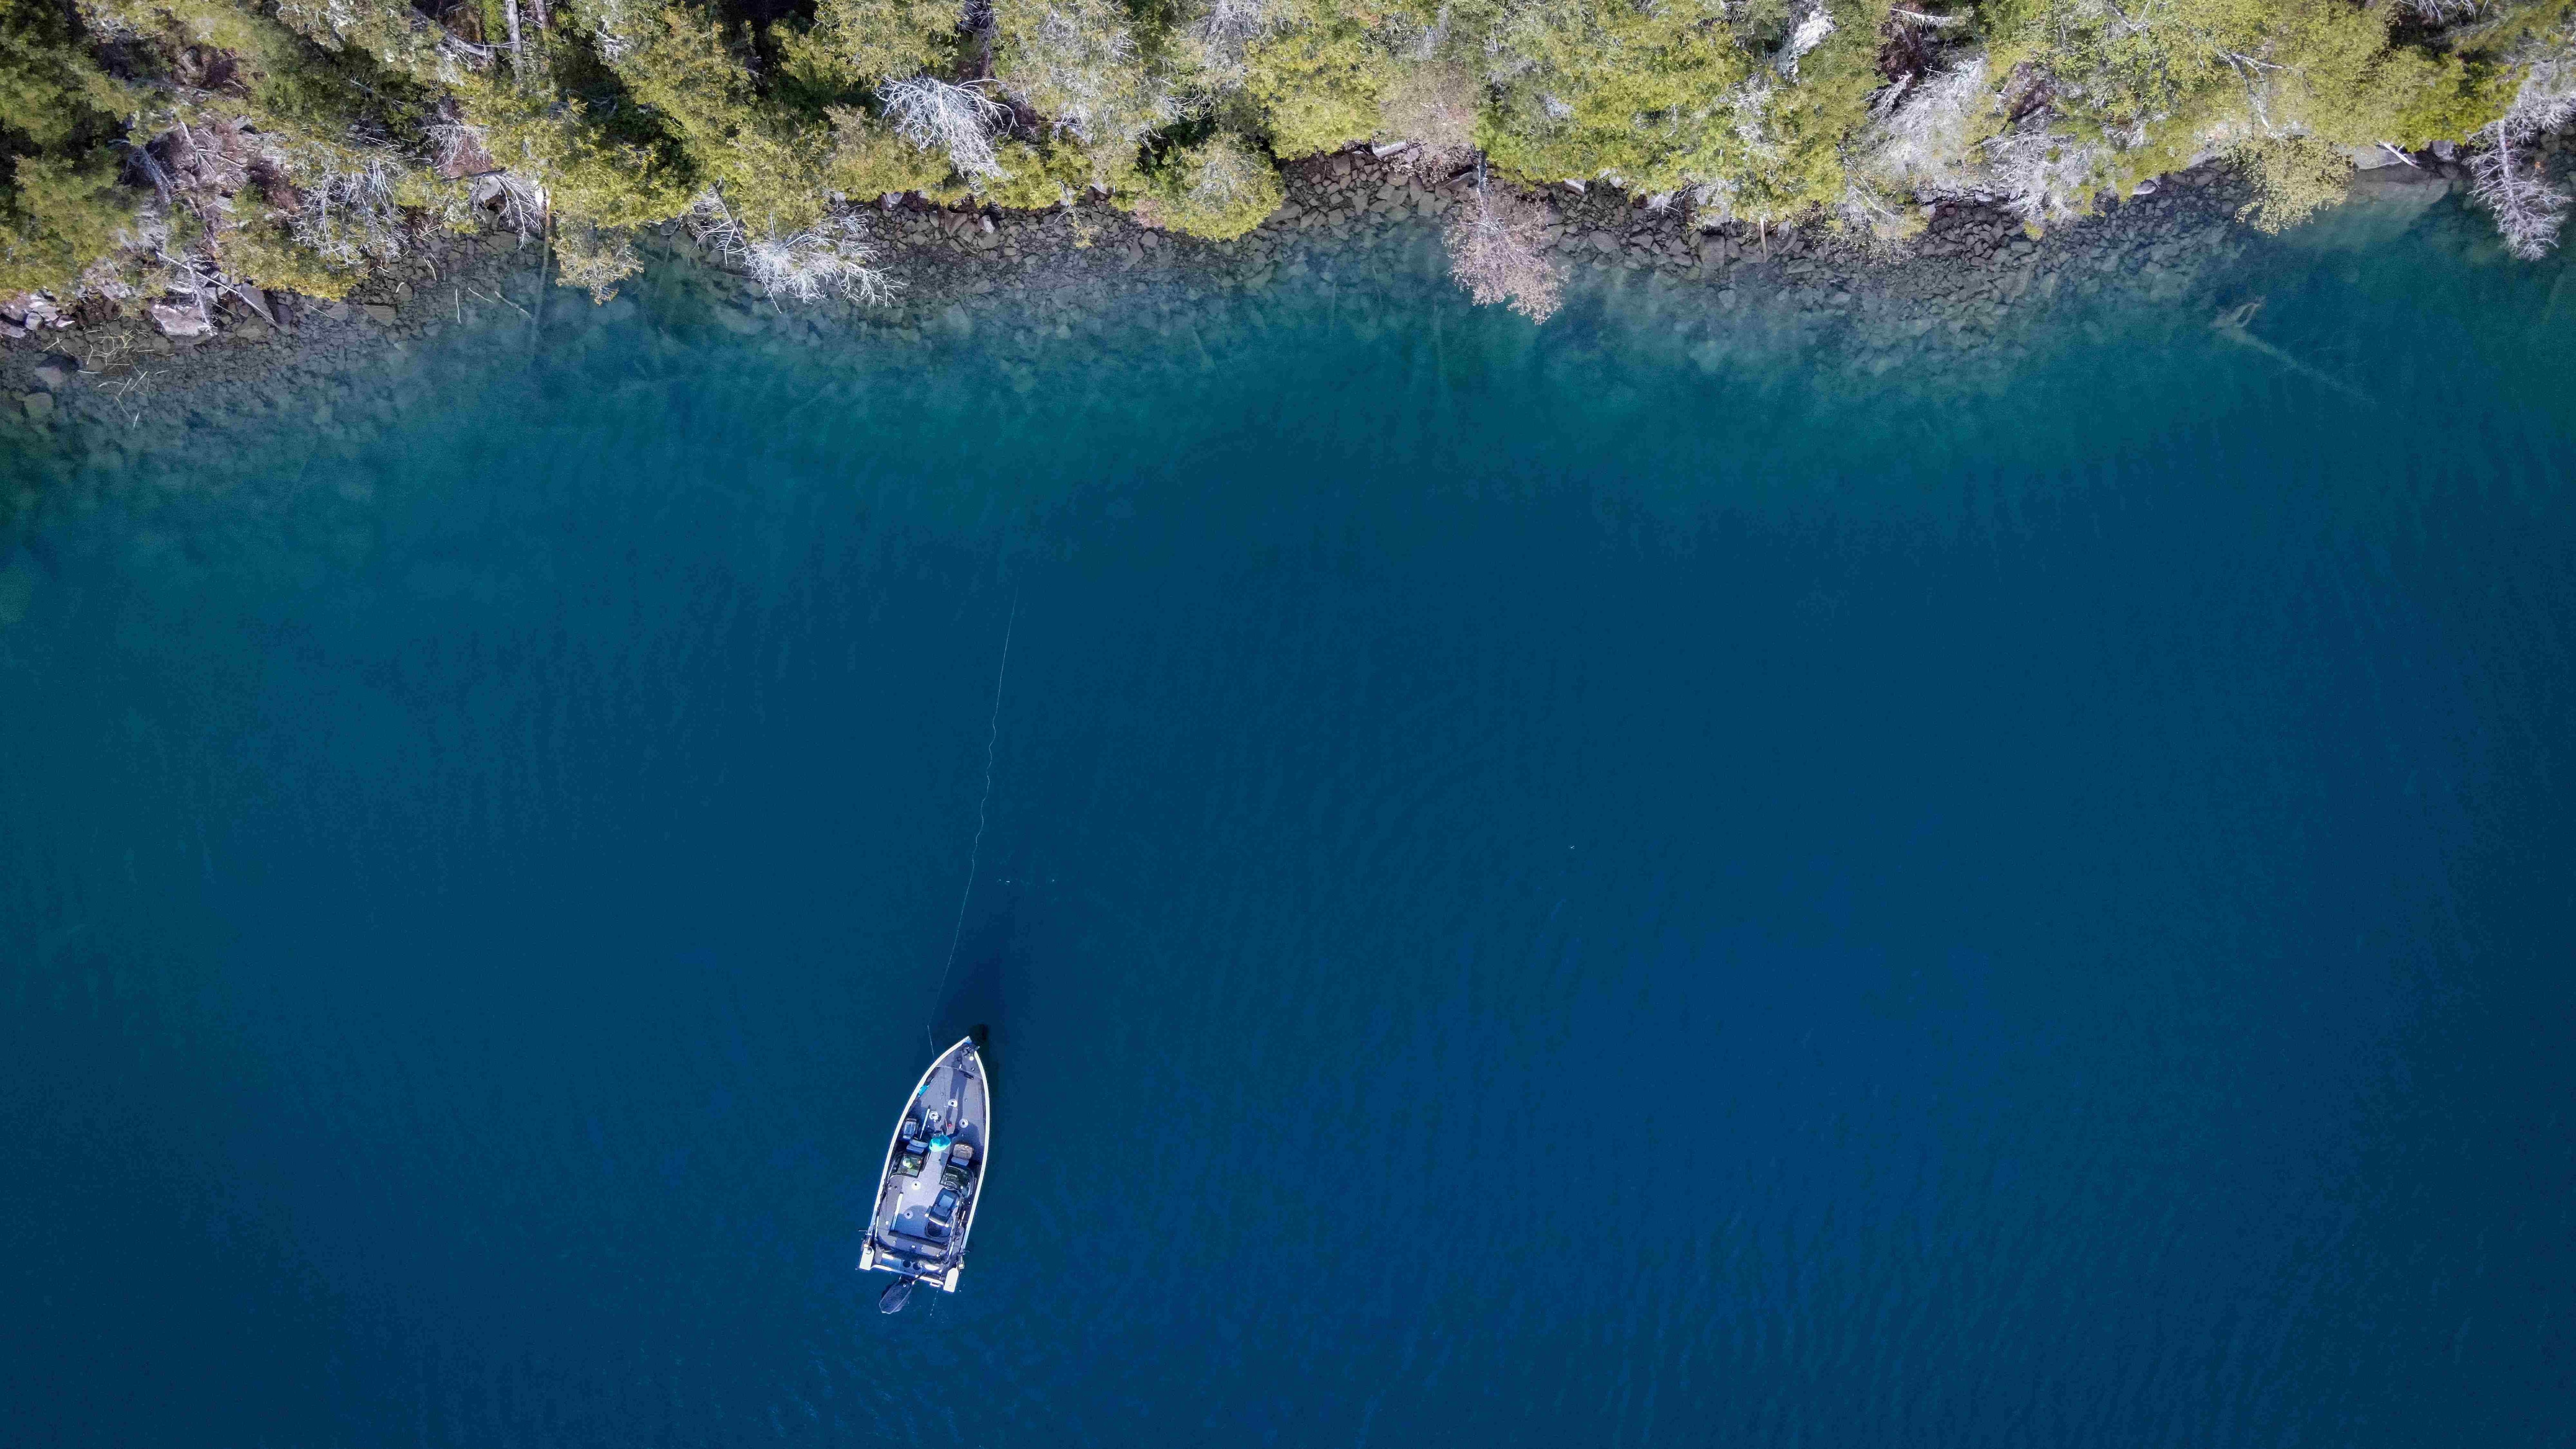 Top view of a fishing day on an Alumacraft Aluminum Boat

